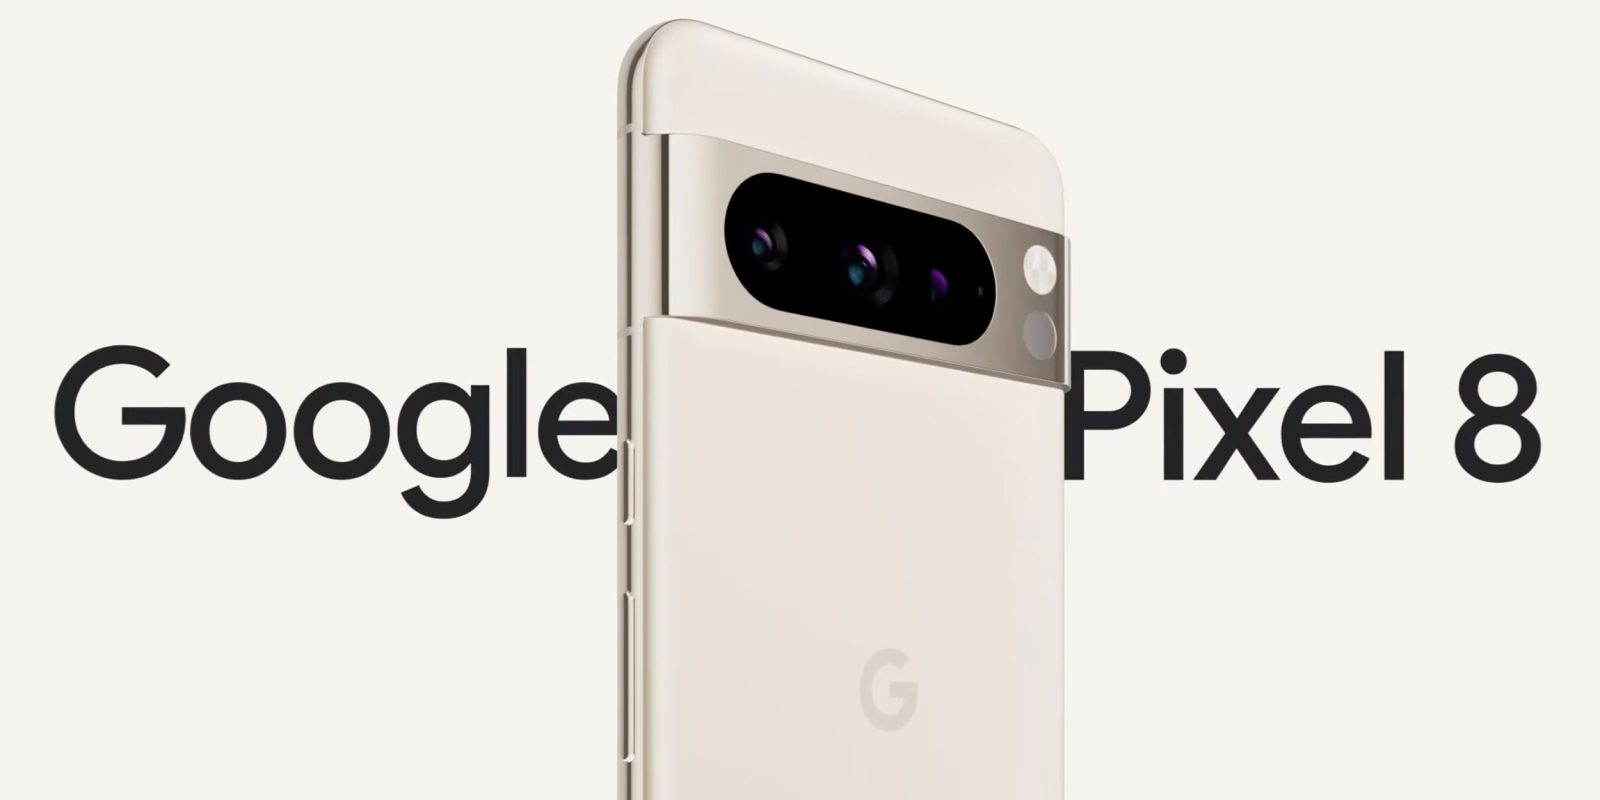 Google Pixel 8 and Google Pixel 8 Pro price and specs leaked ahead